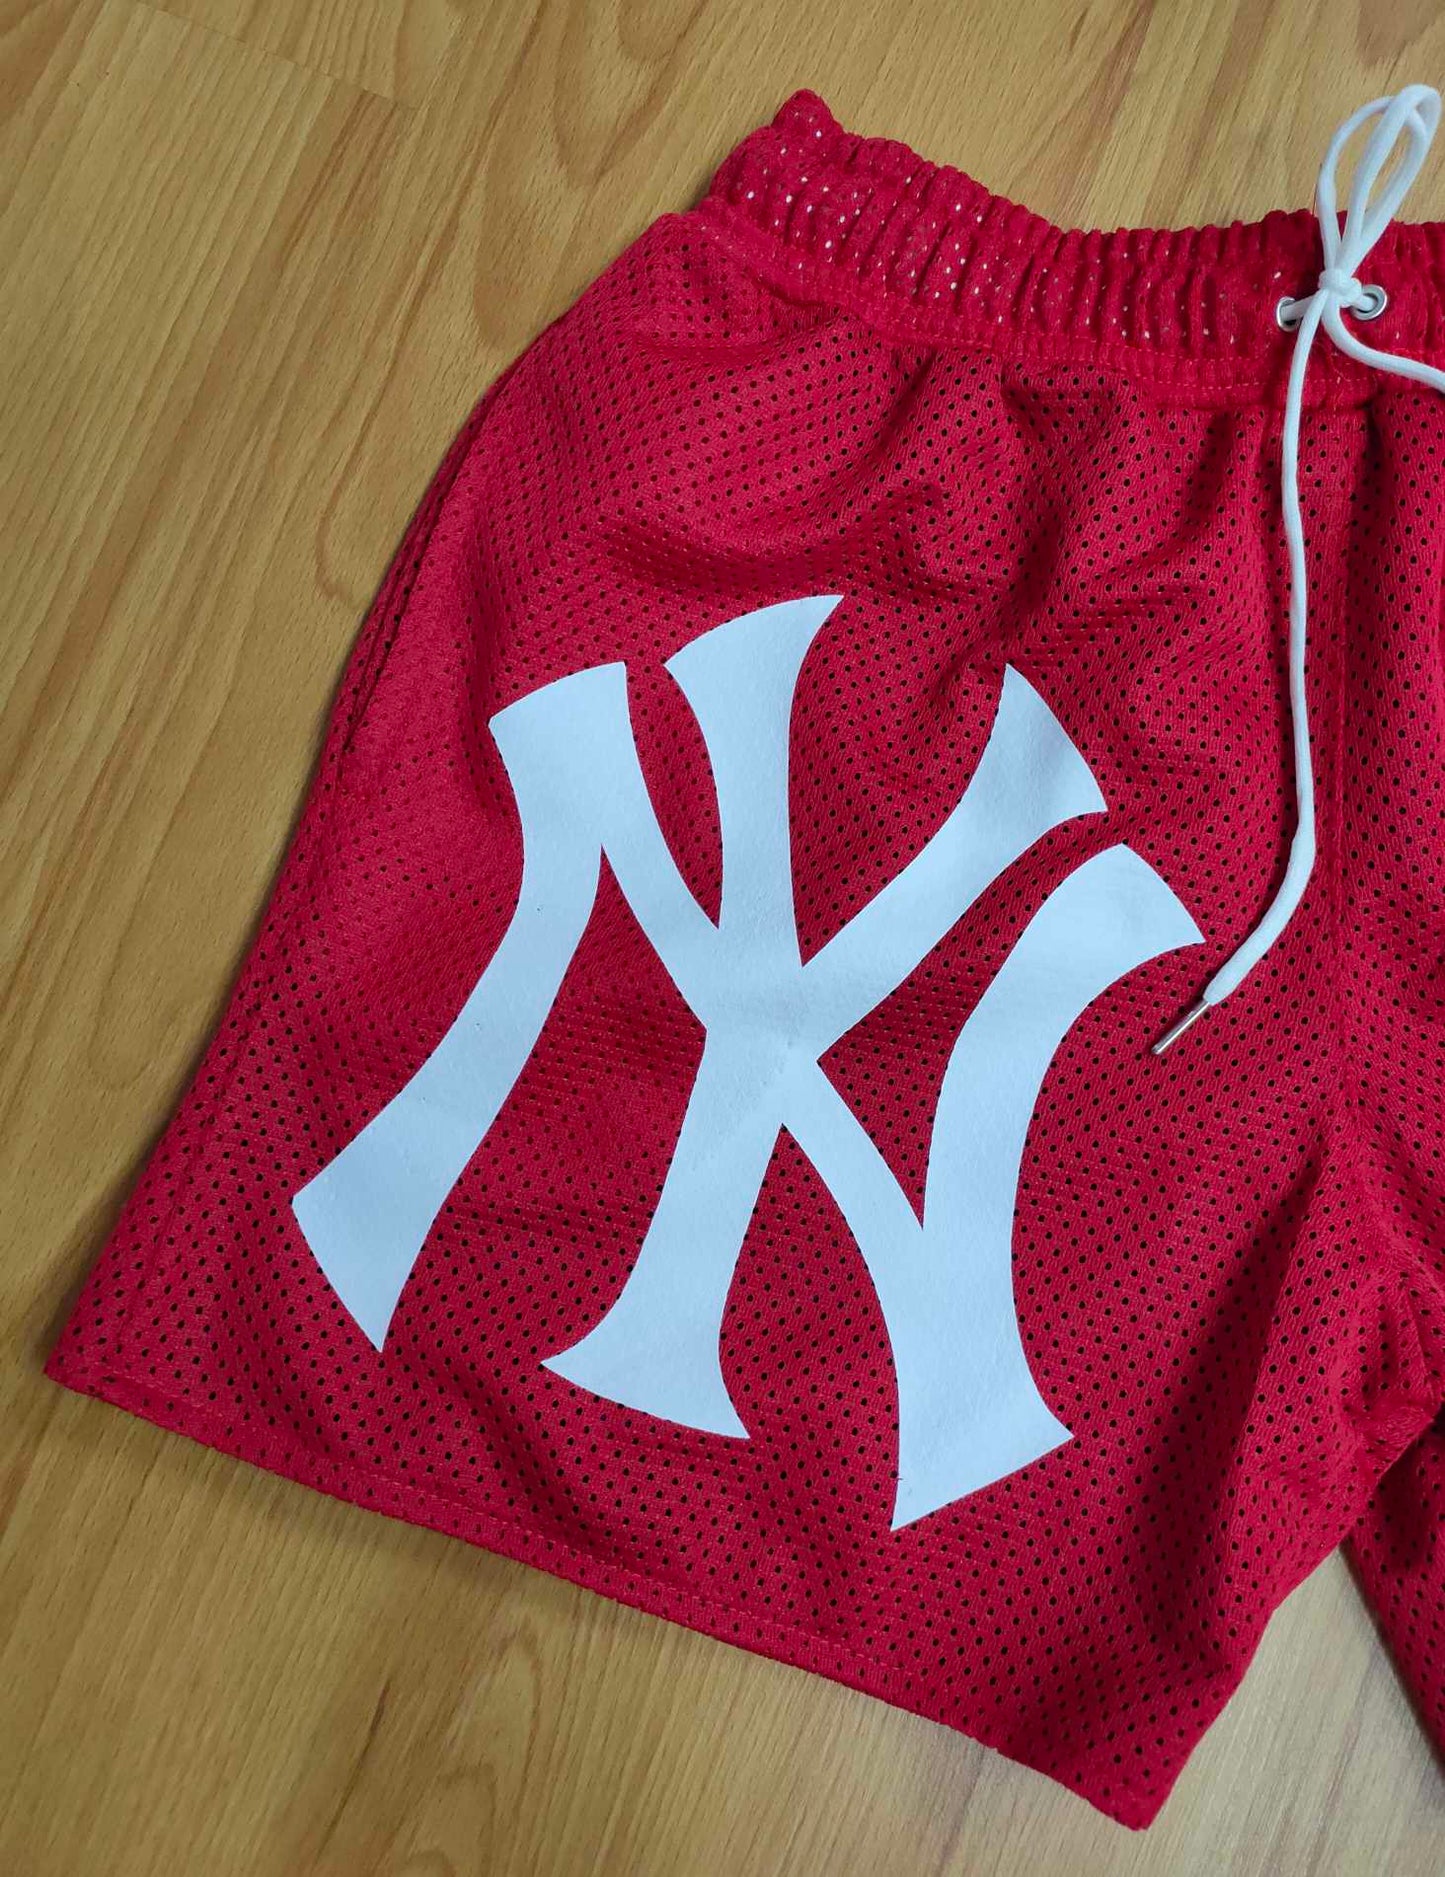 Jersey Shorts "NY Red" Free Size /Above the Knee